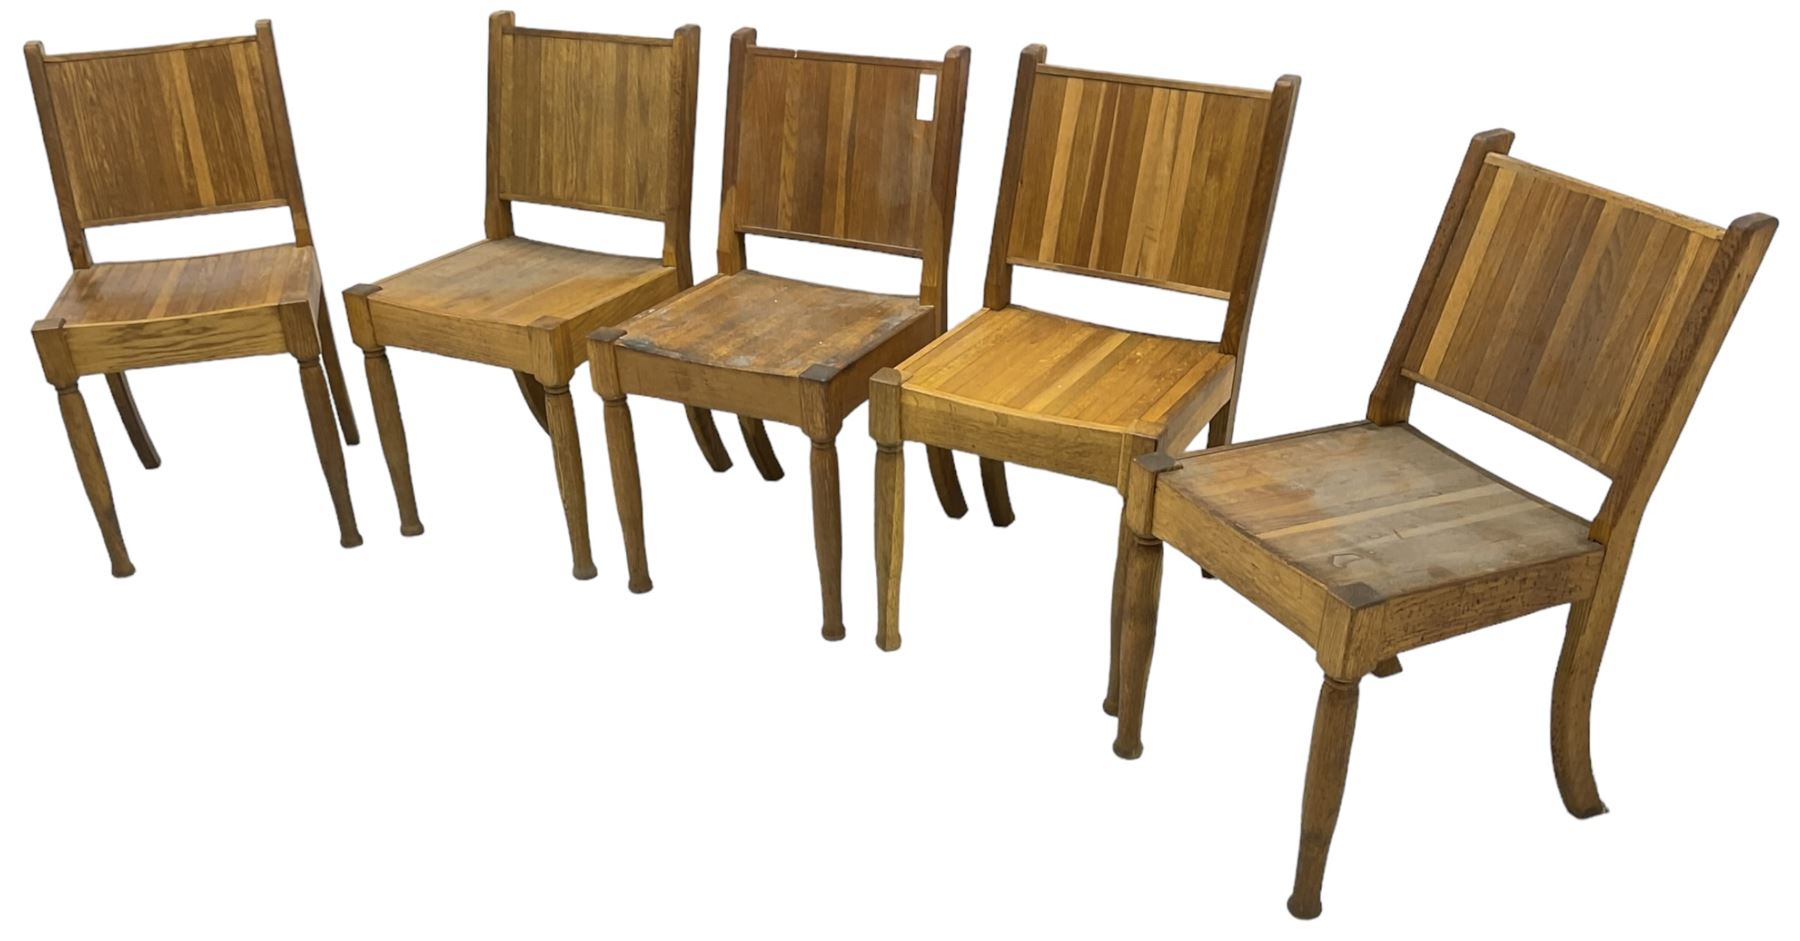 Set of five 20th century oak chairs - Image 6 of 6